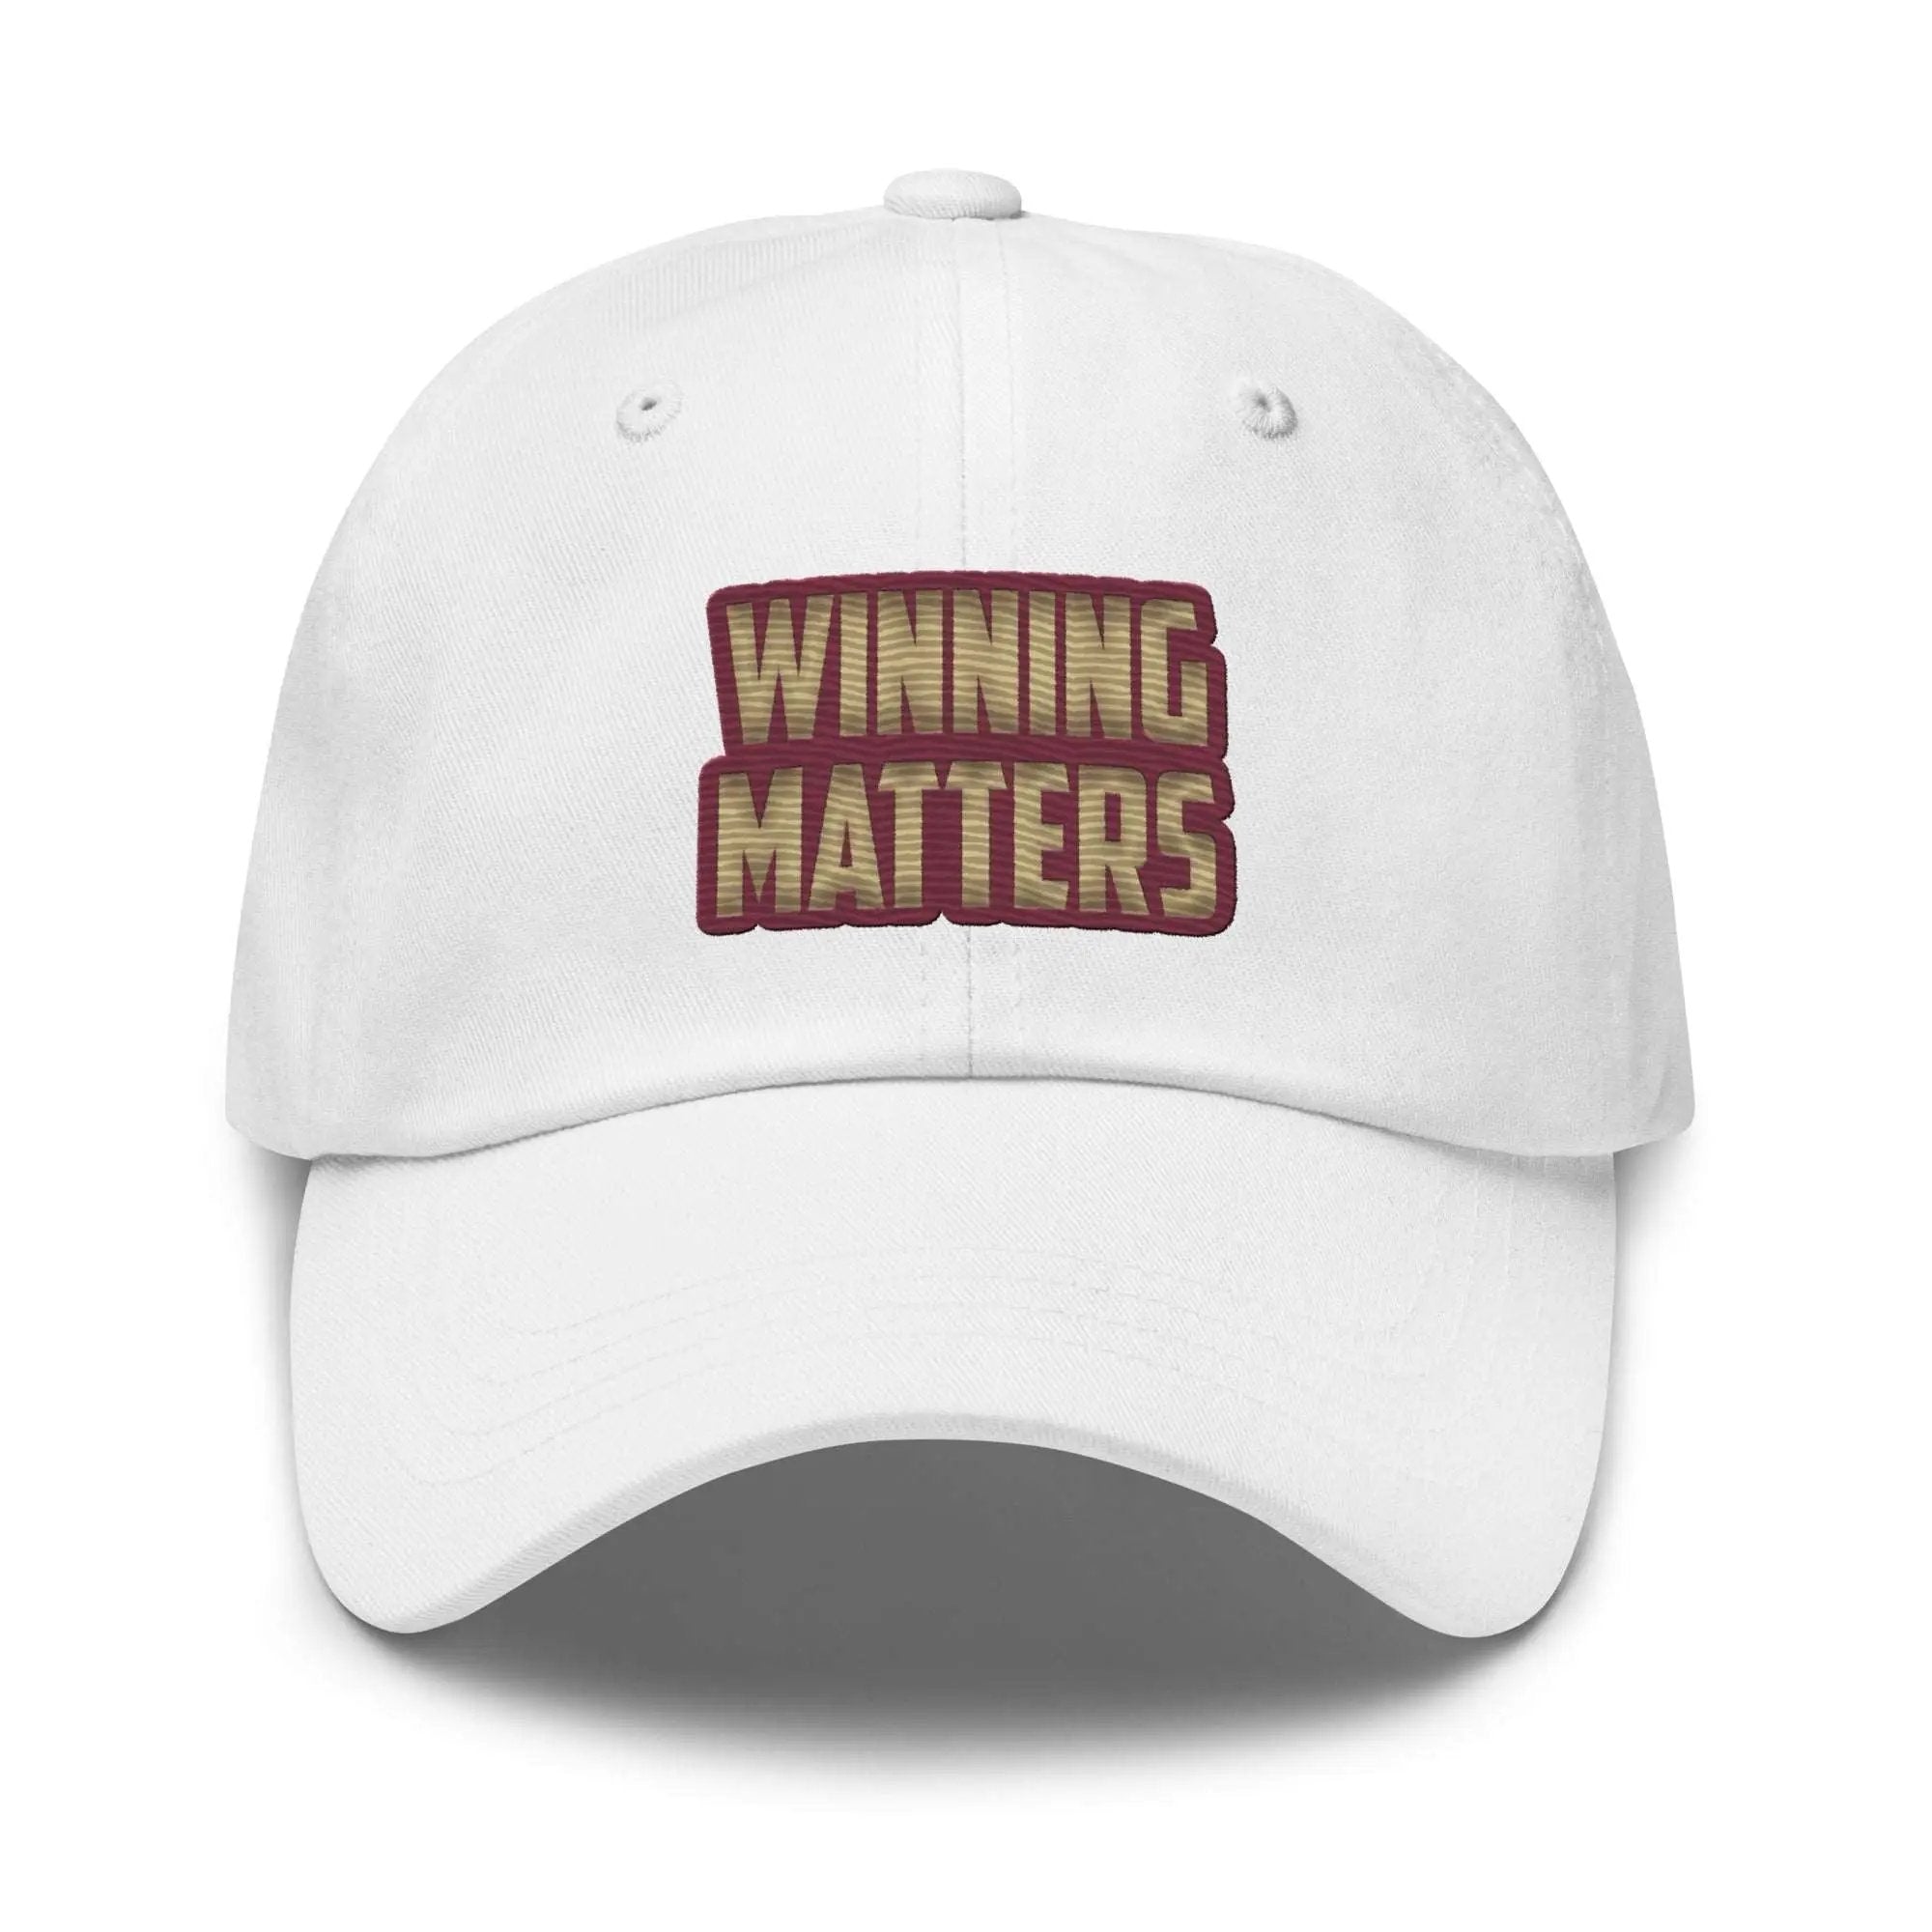 a tan hat with the words winning matters printed on it